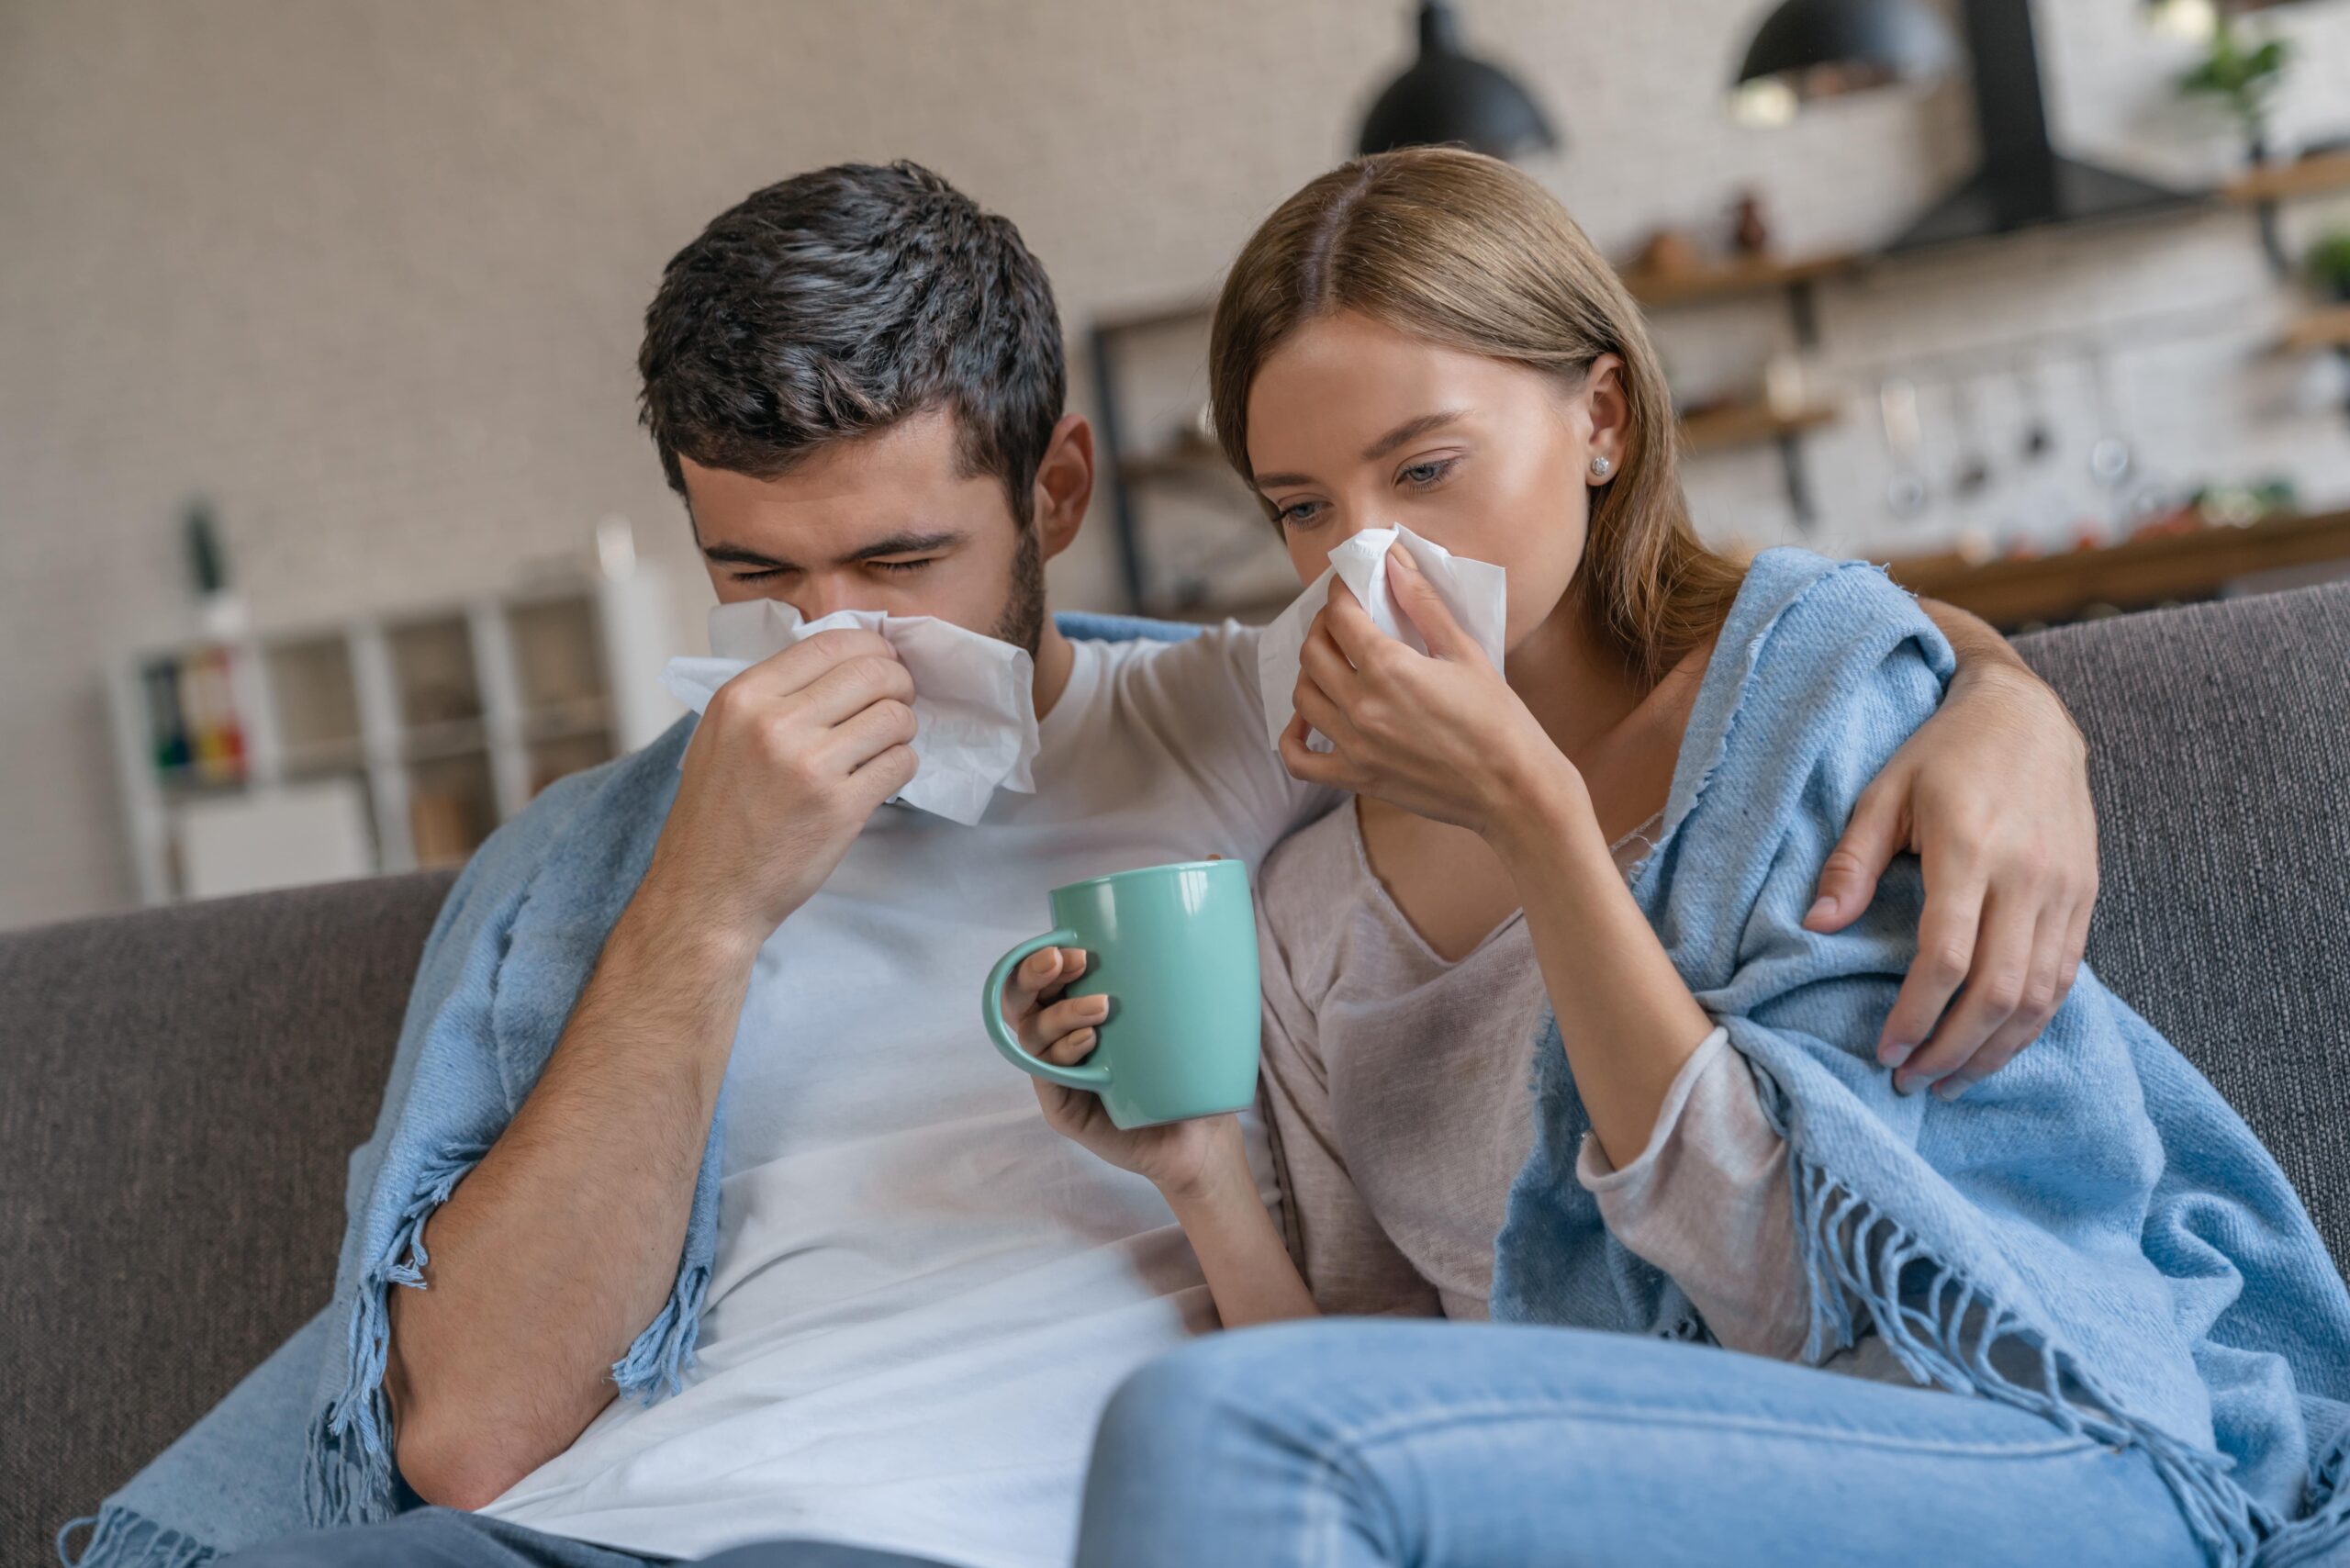 Why Some People Always Get Sick, and How to Strengthen Your Cellular Defenses